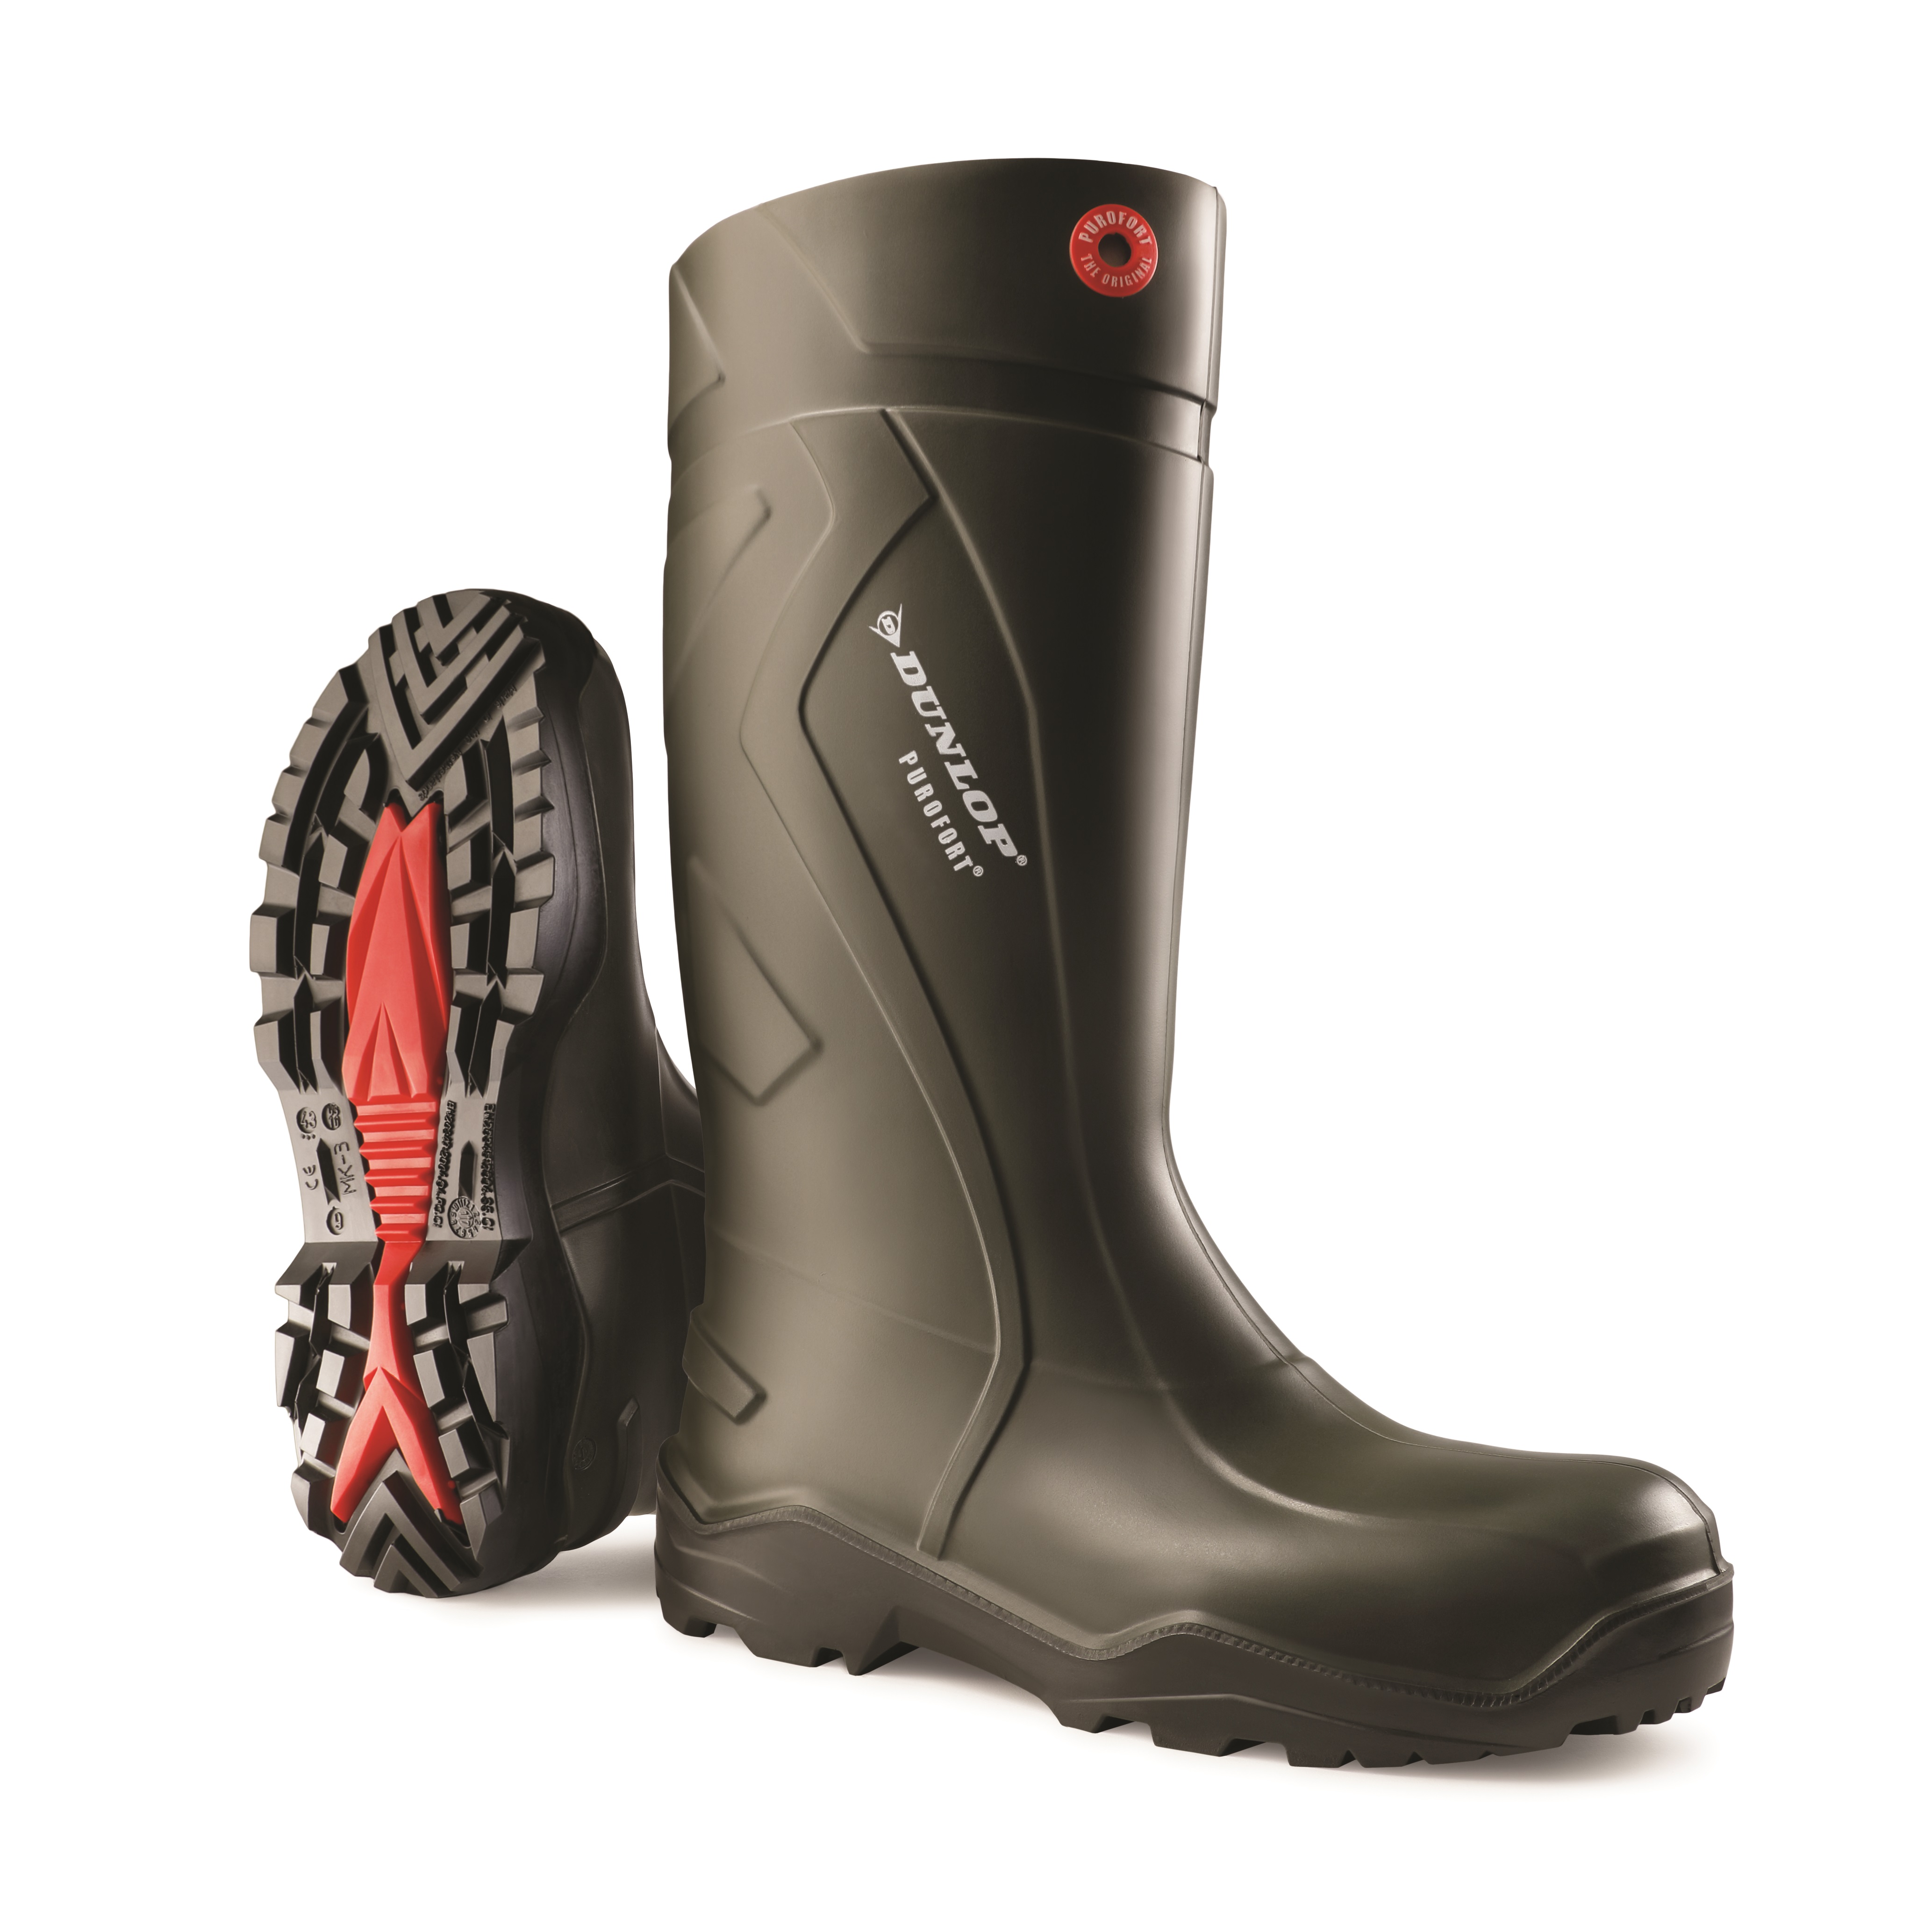 dunlop purofort thermo plus full safety green wellington